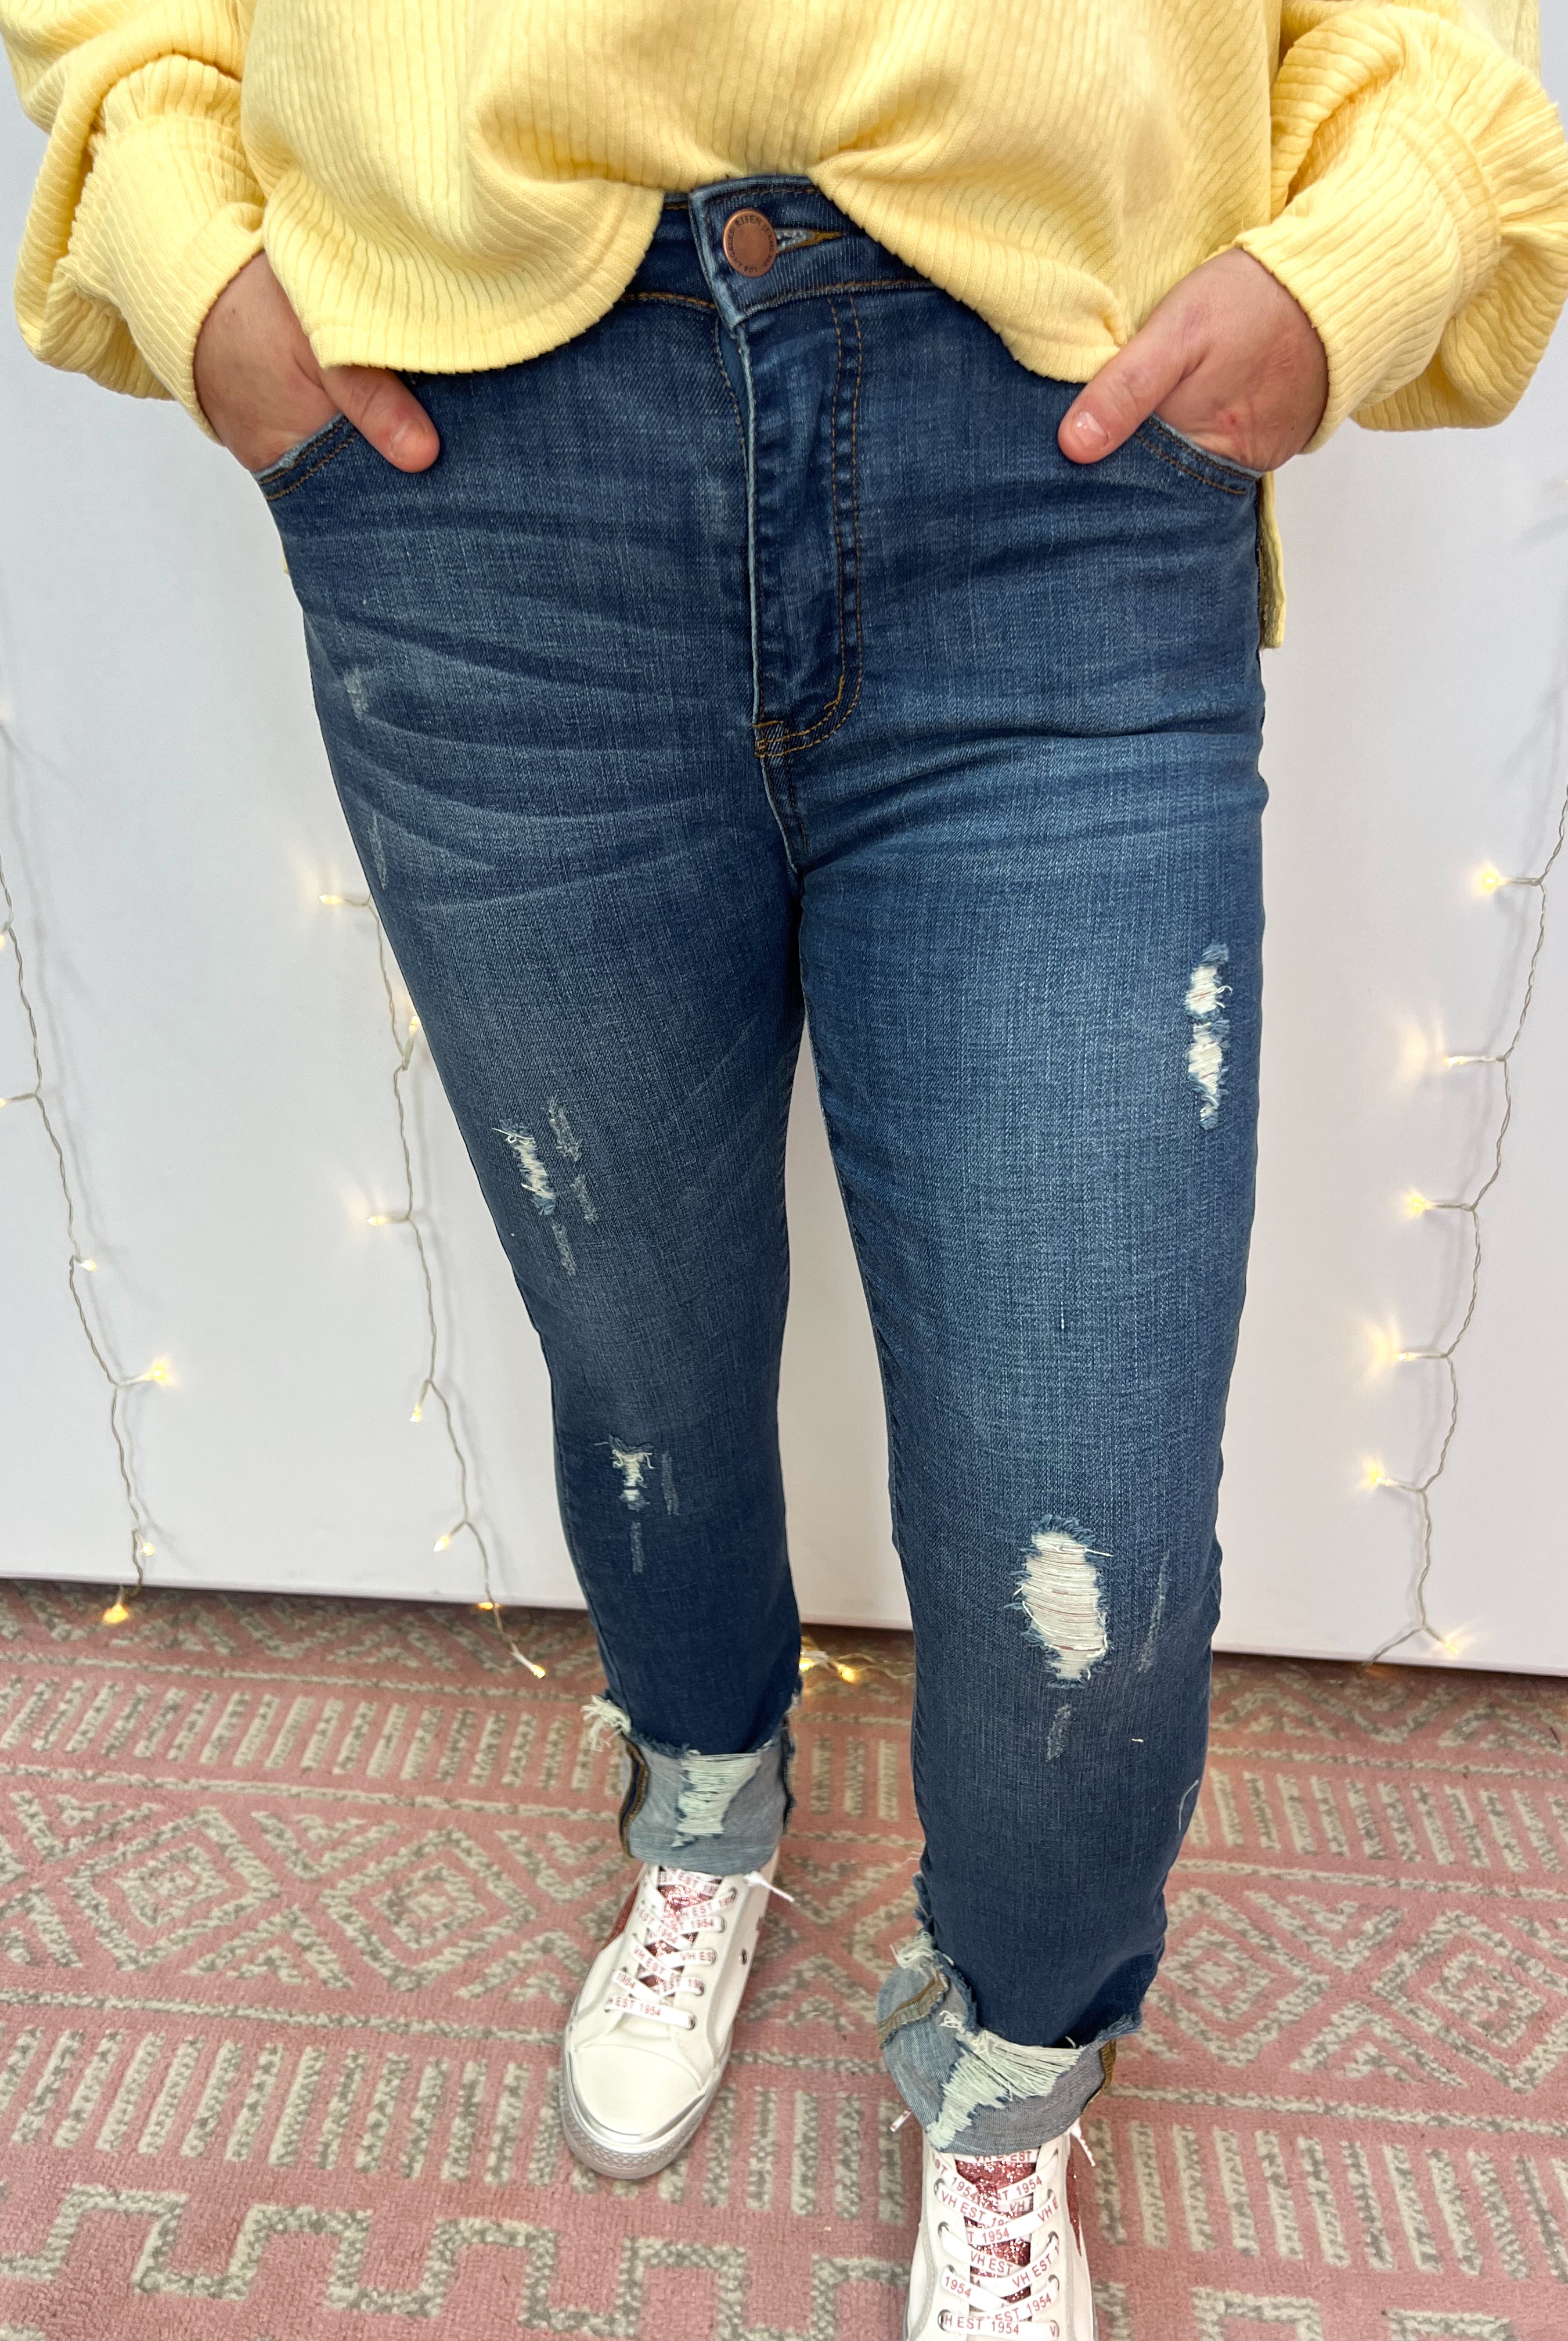 RISEN - Mid Rise Frayed Ankle Straight Jeans-210 Jeans-Risen-The Lovely Closet, Women's Fashion Boutique in Alexandria, KY